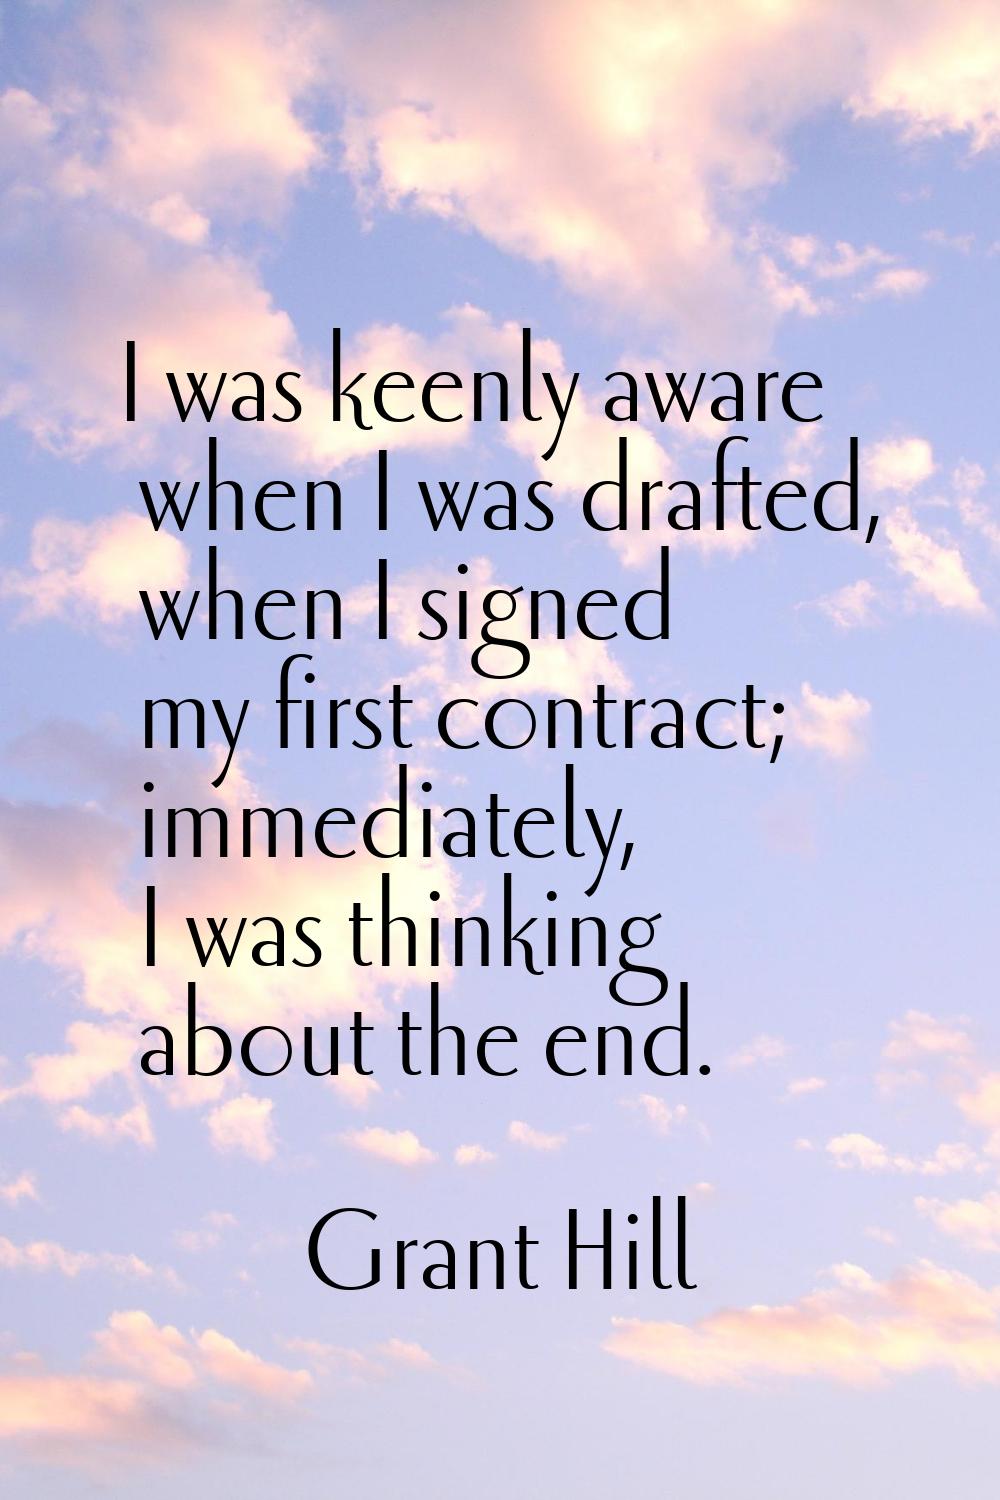 I was keenly aware when I was drafted, when I signed my first contract; immediately, I was thinking